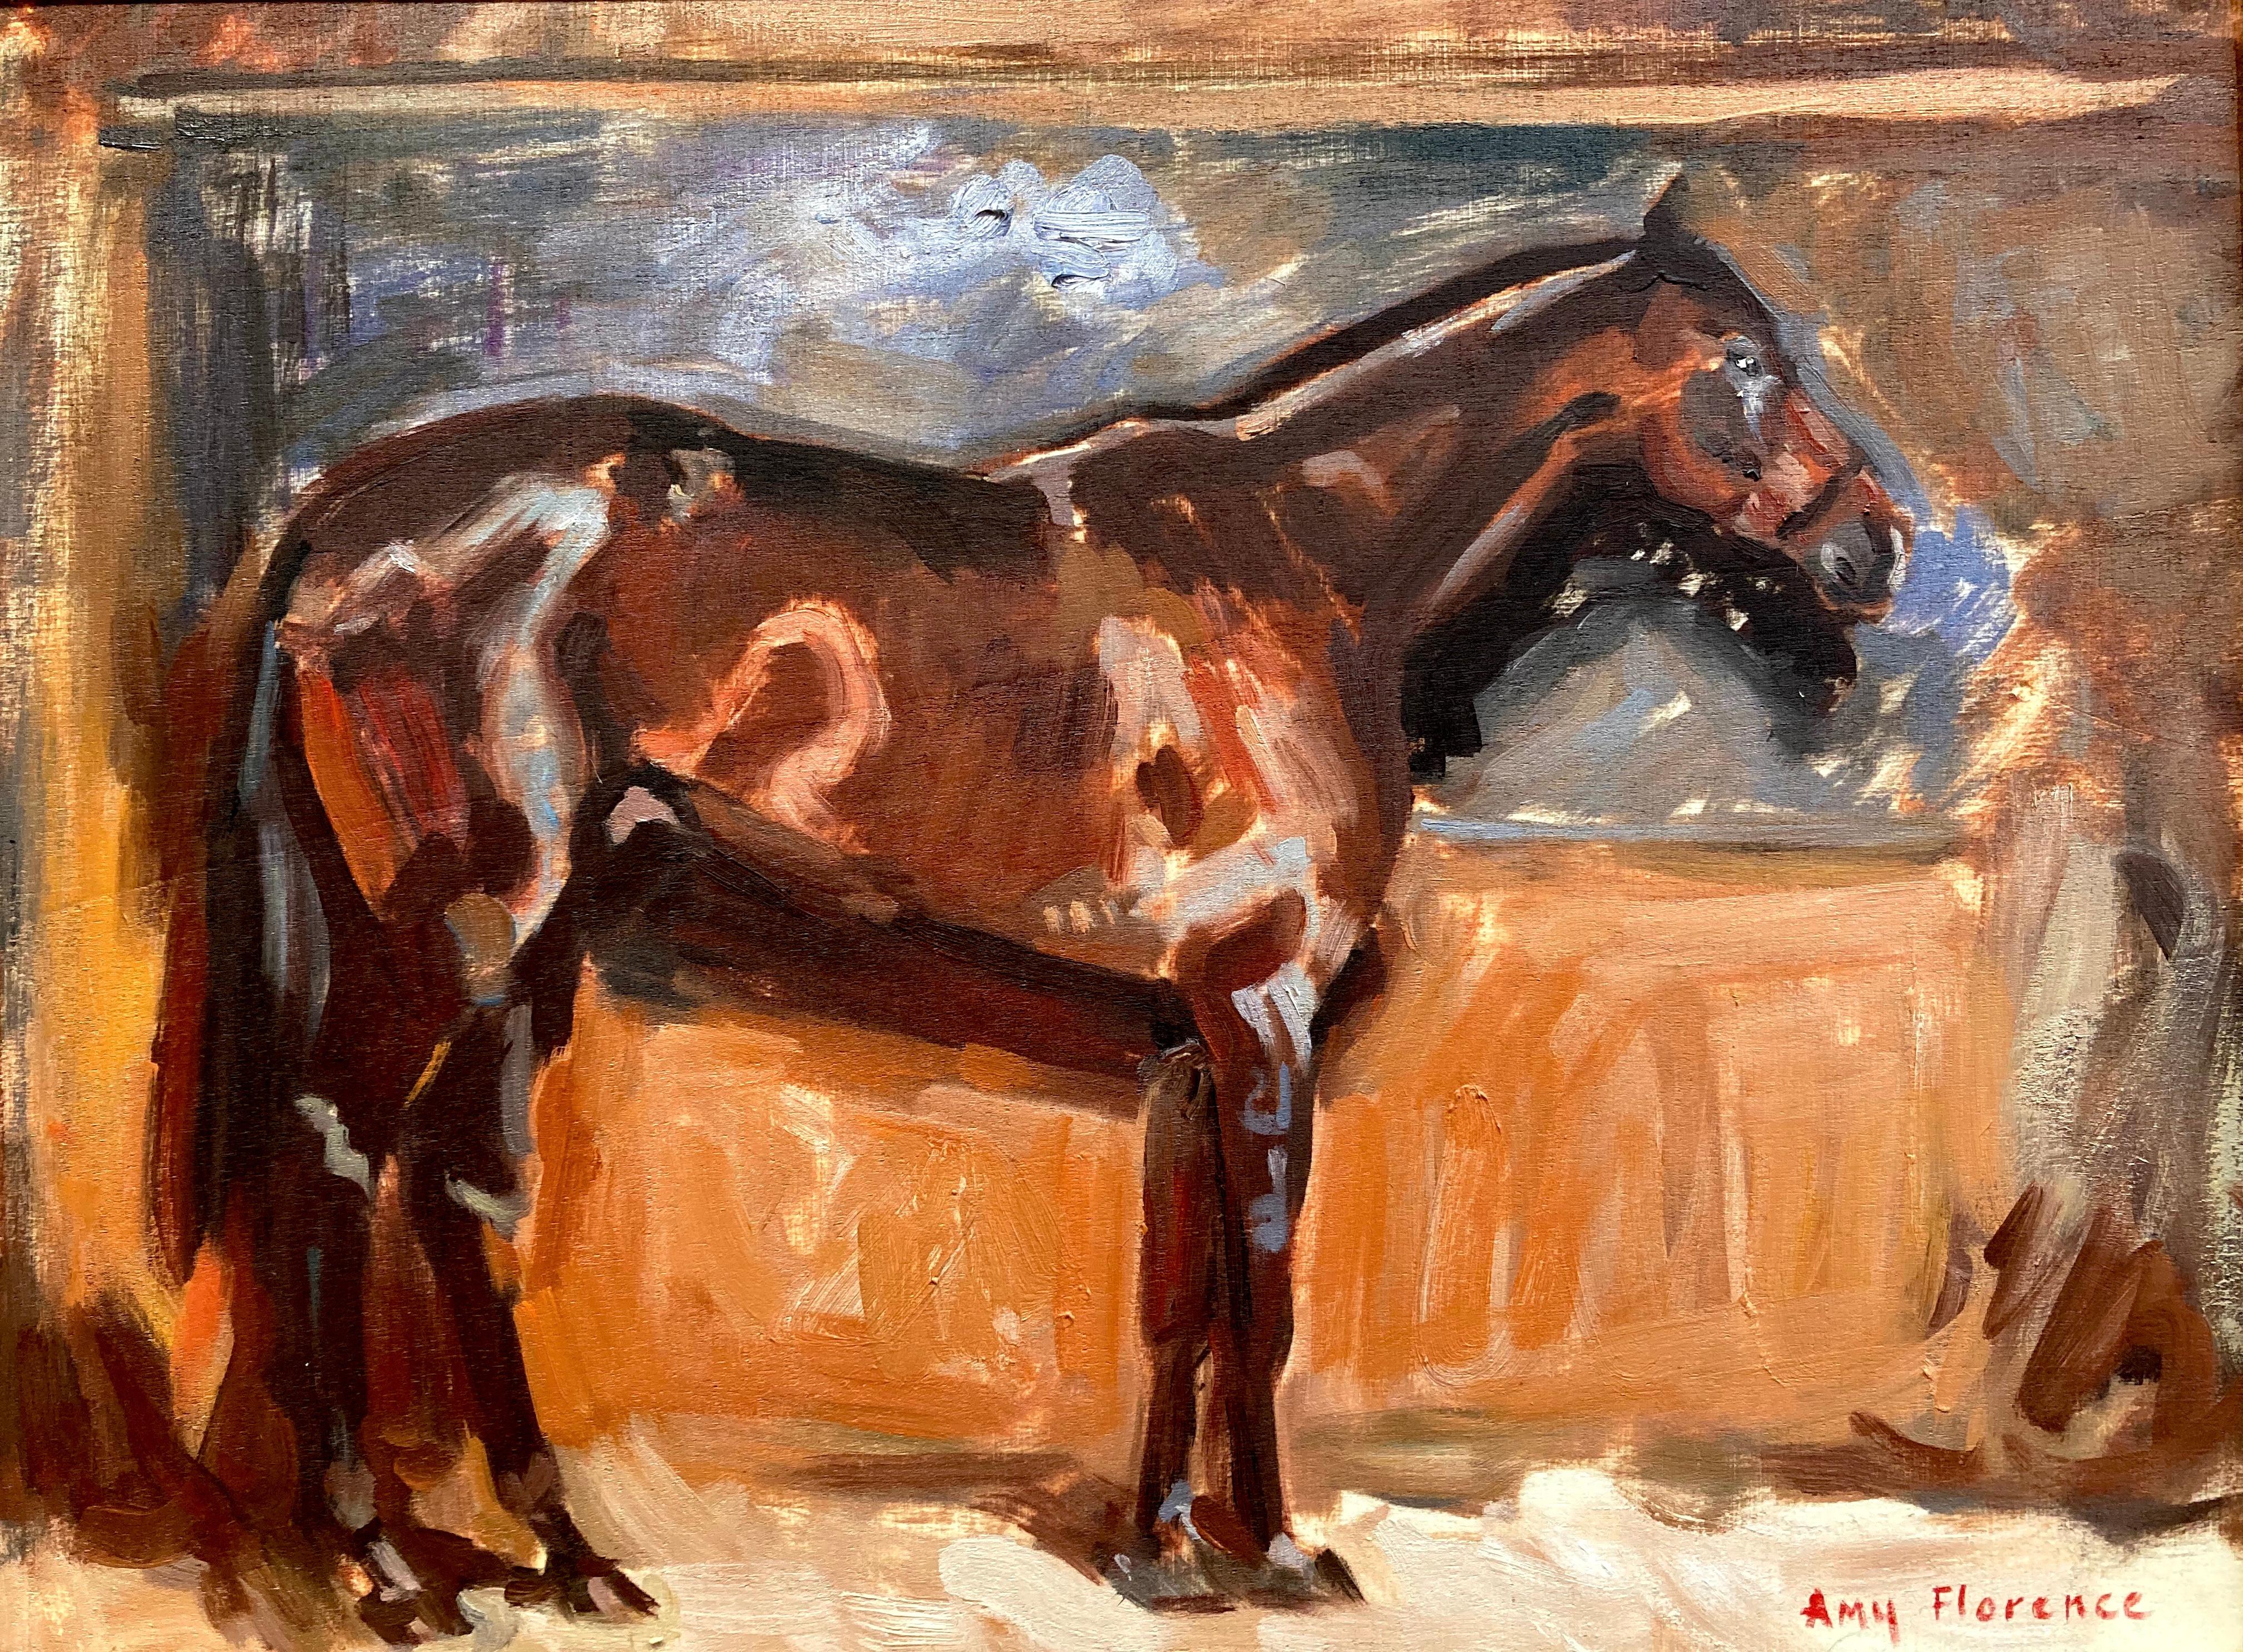 Amy Florence Animal Painting - "Horse Sketch 1" study of an Alfred Munnings painting, brown and earth tones